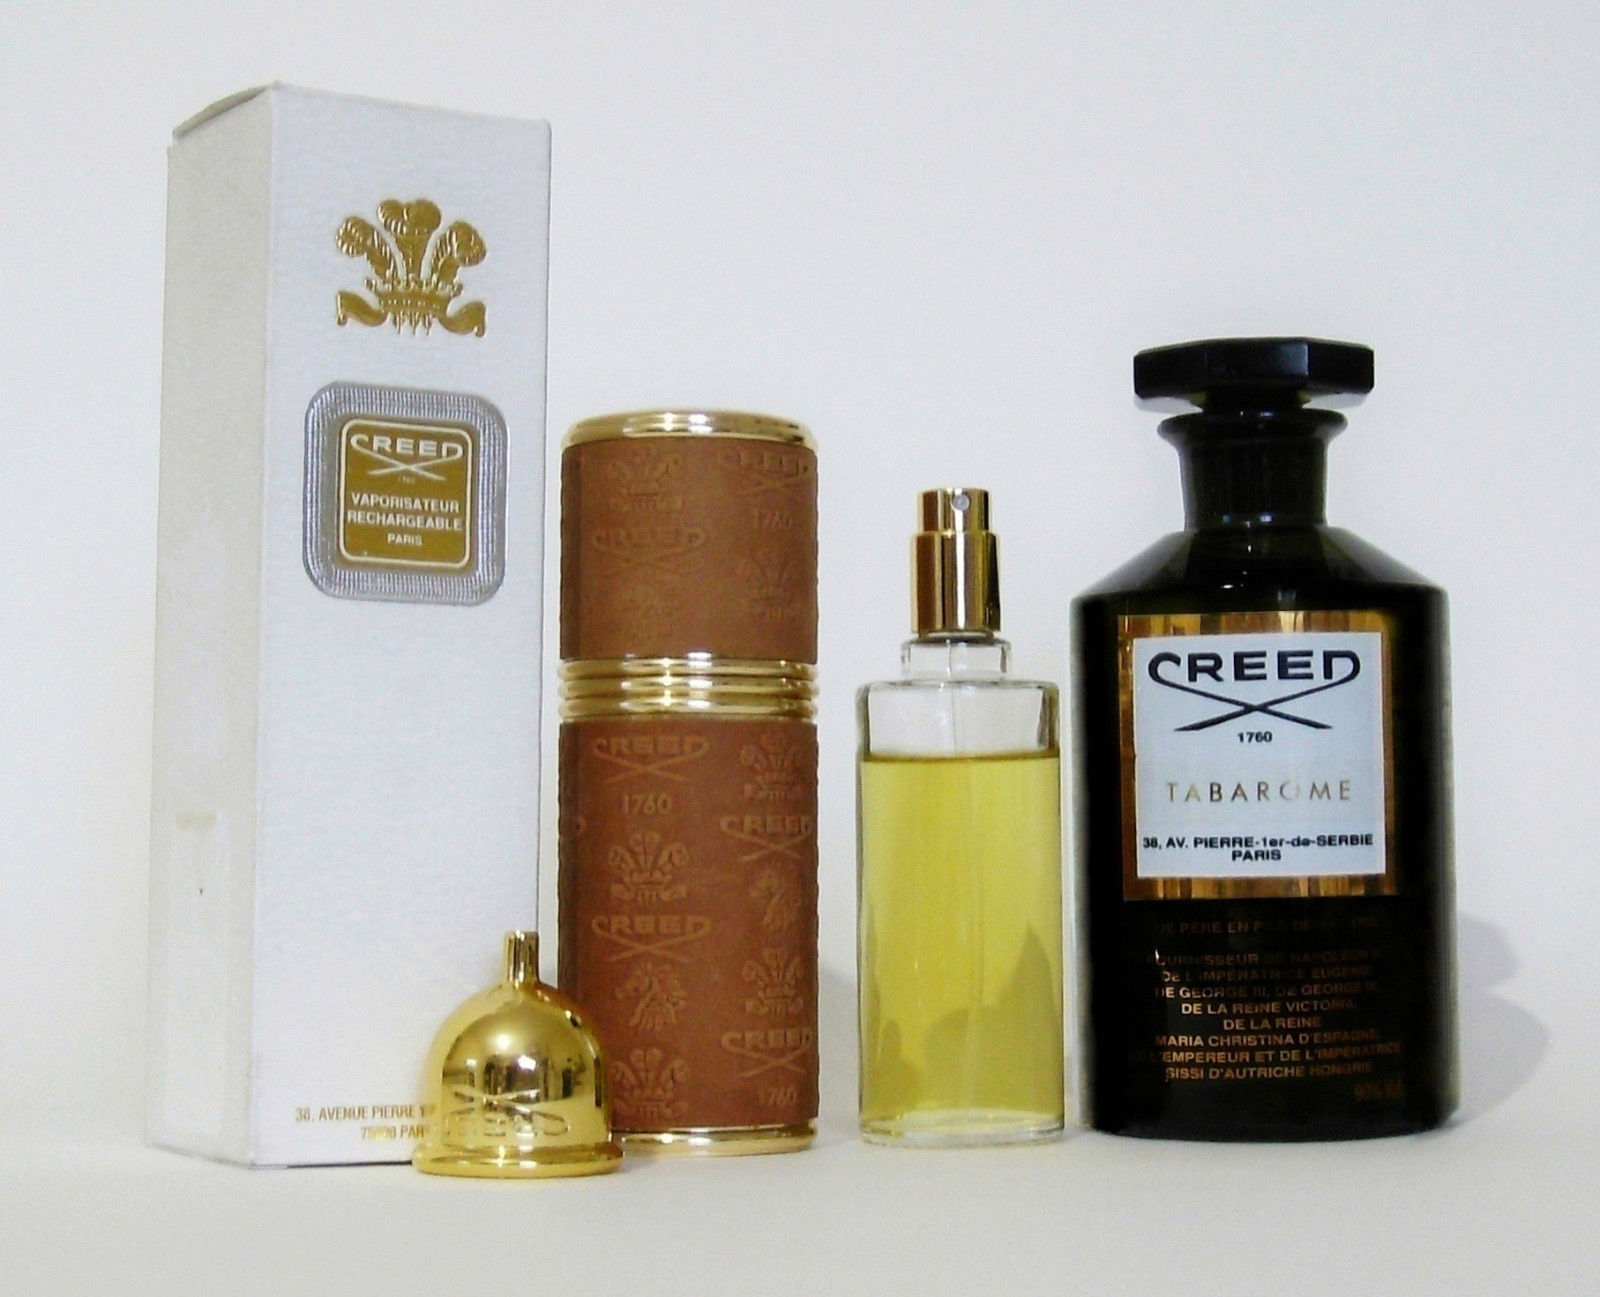 Tabarome Private Collection Creed: Dry Spicy Tobacco ~ Fragrance Reviews